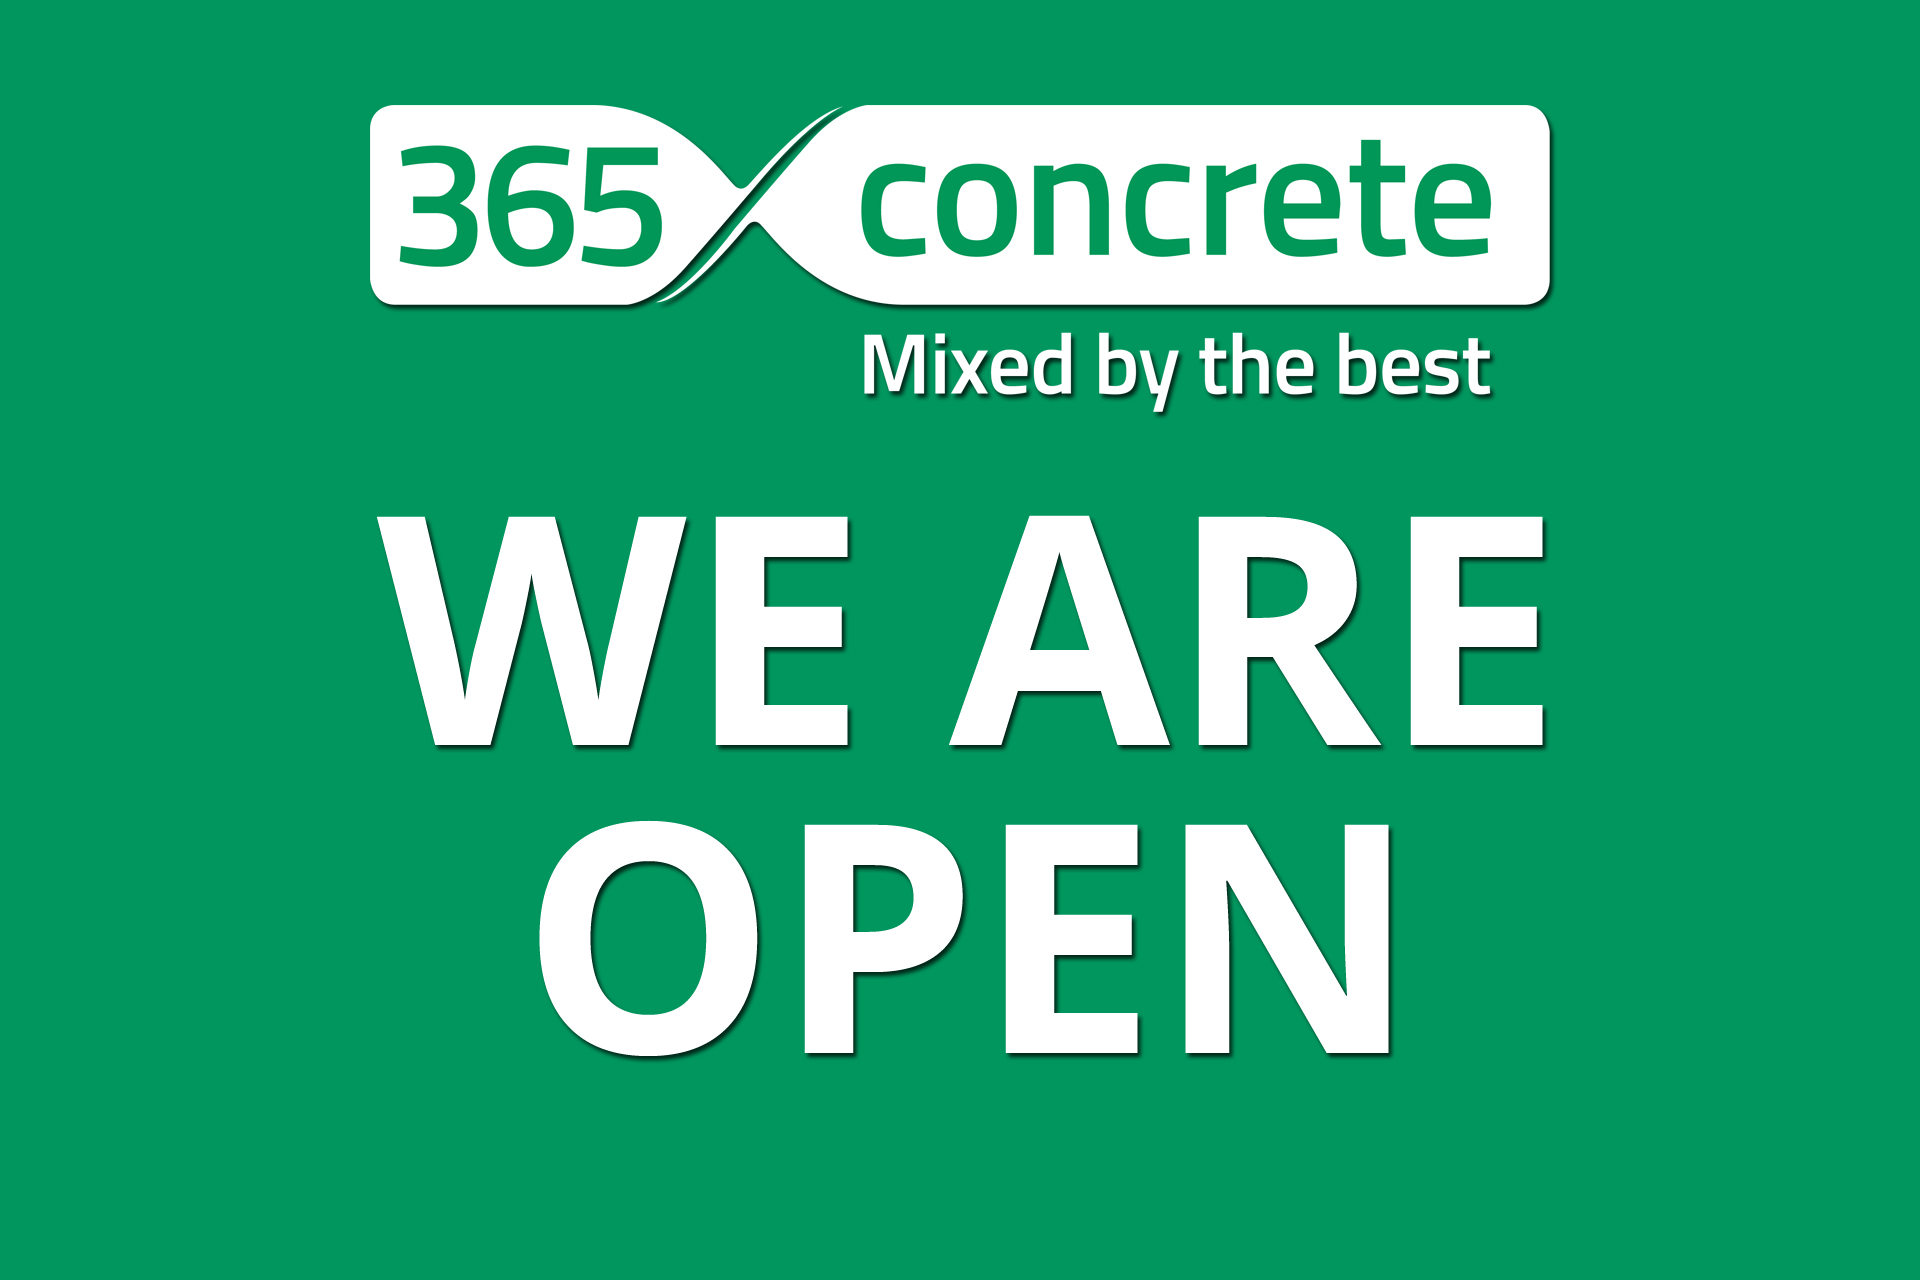 365 Concrete are open for business - Order your concrete now 0208 751 0101